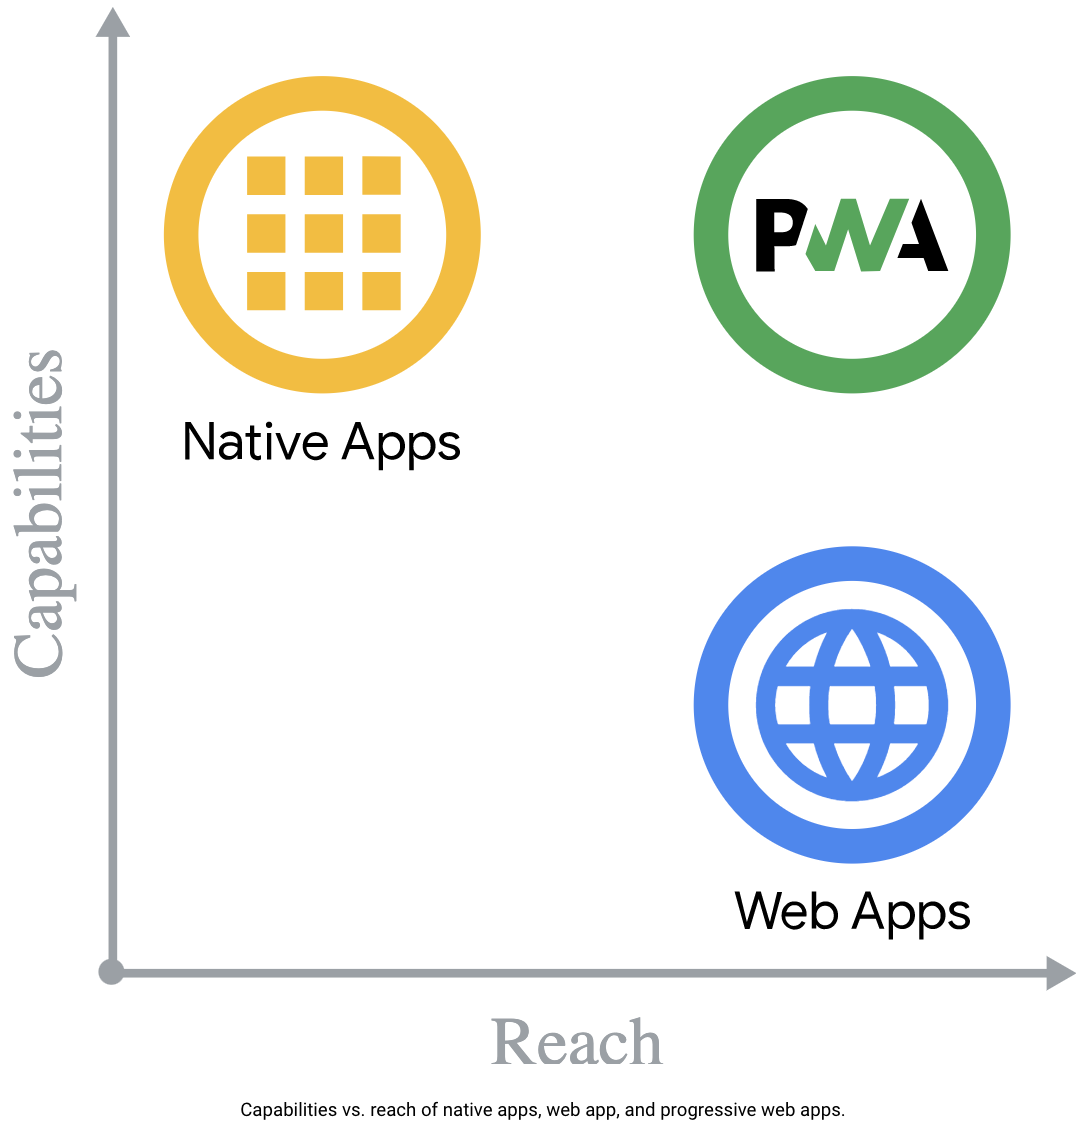 Native apps & Web apps & PWA apps